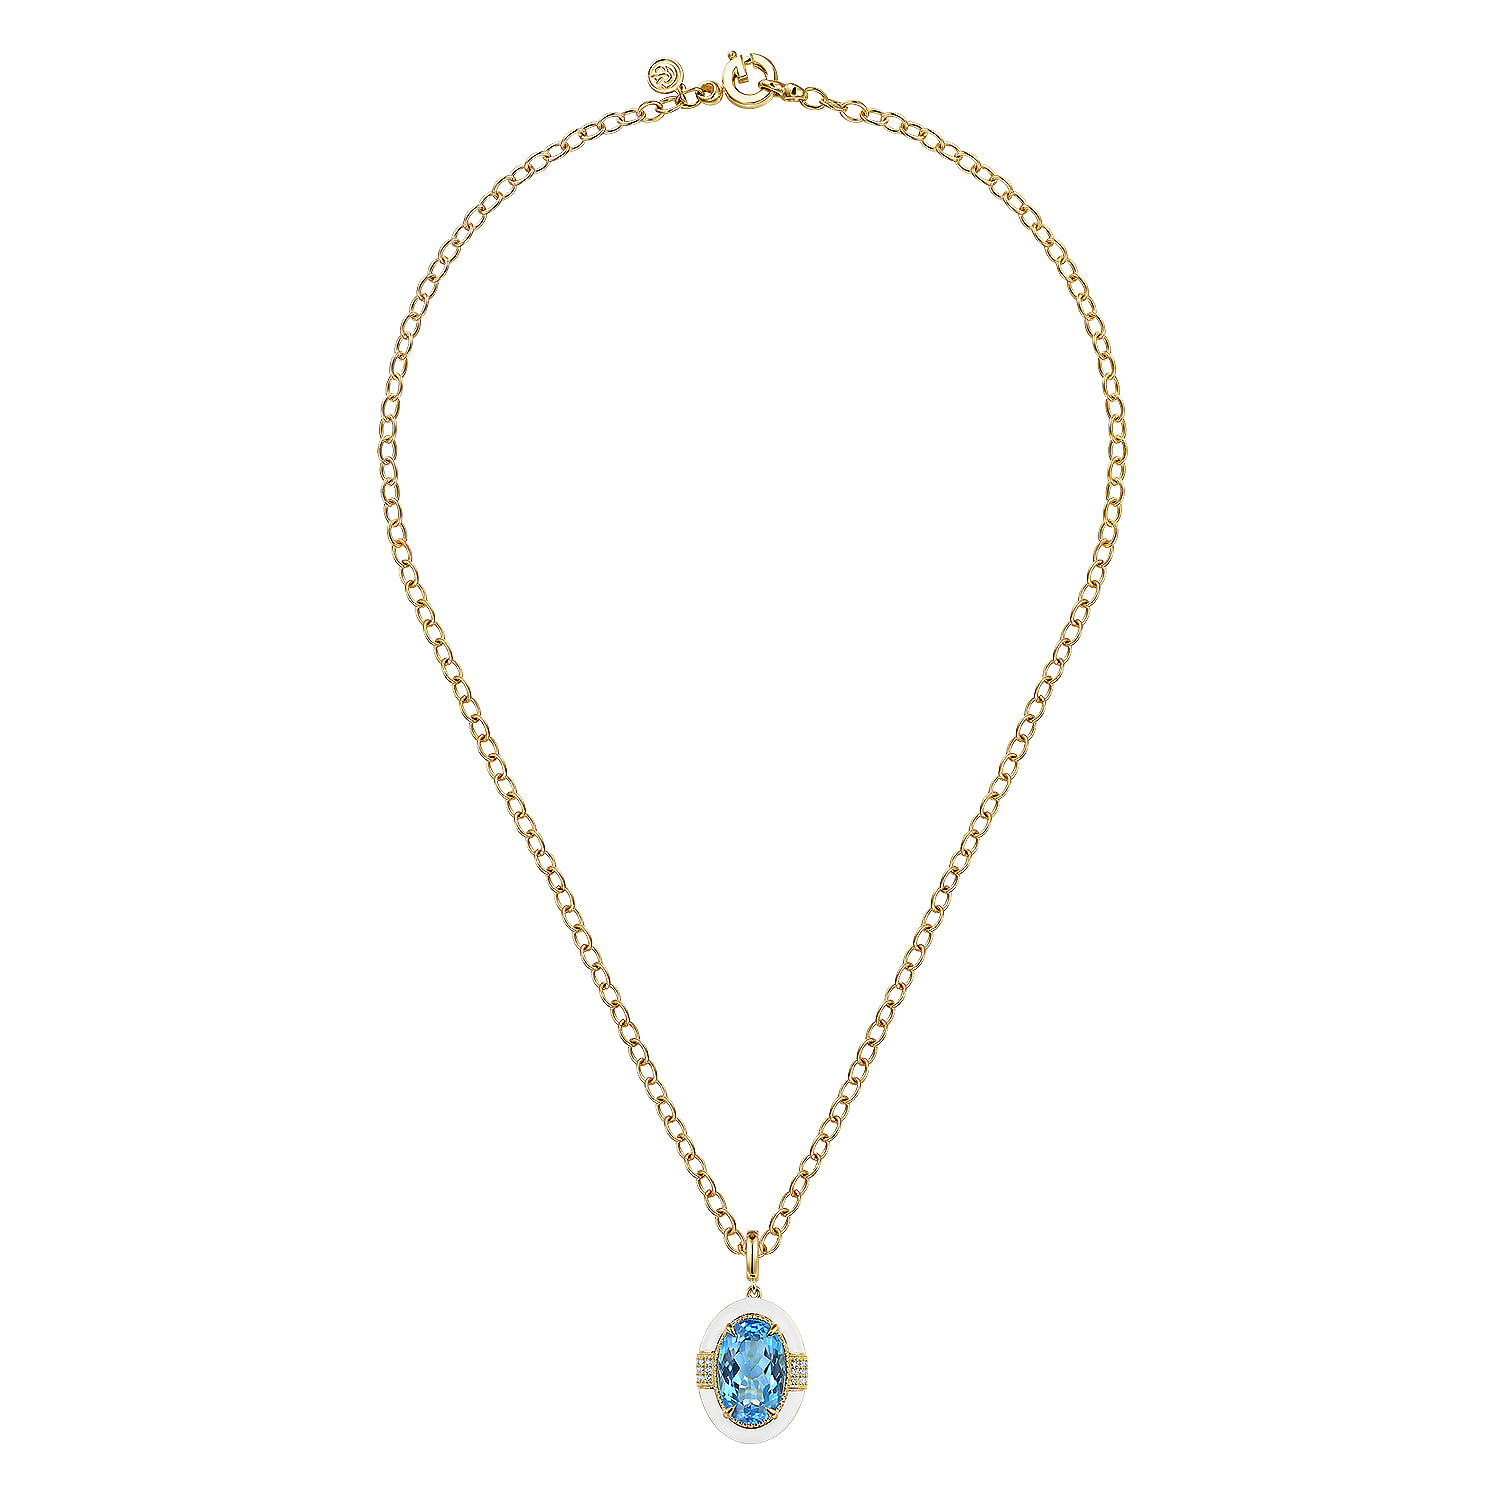 14K Yellow Gold Diamond and Blue Topaz Oval Shape Necklace With Flower Pattern J-Back and White Enamel